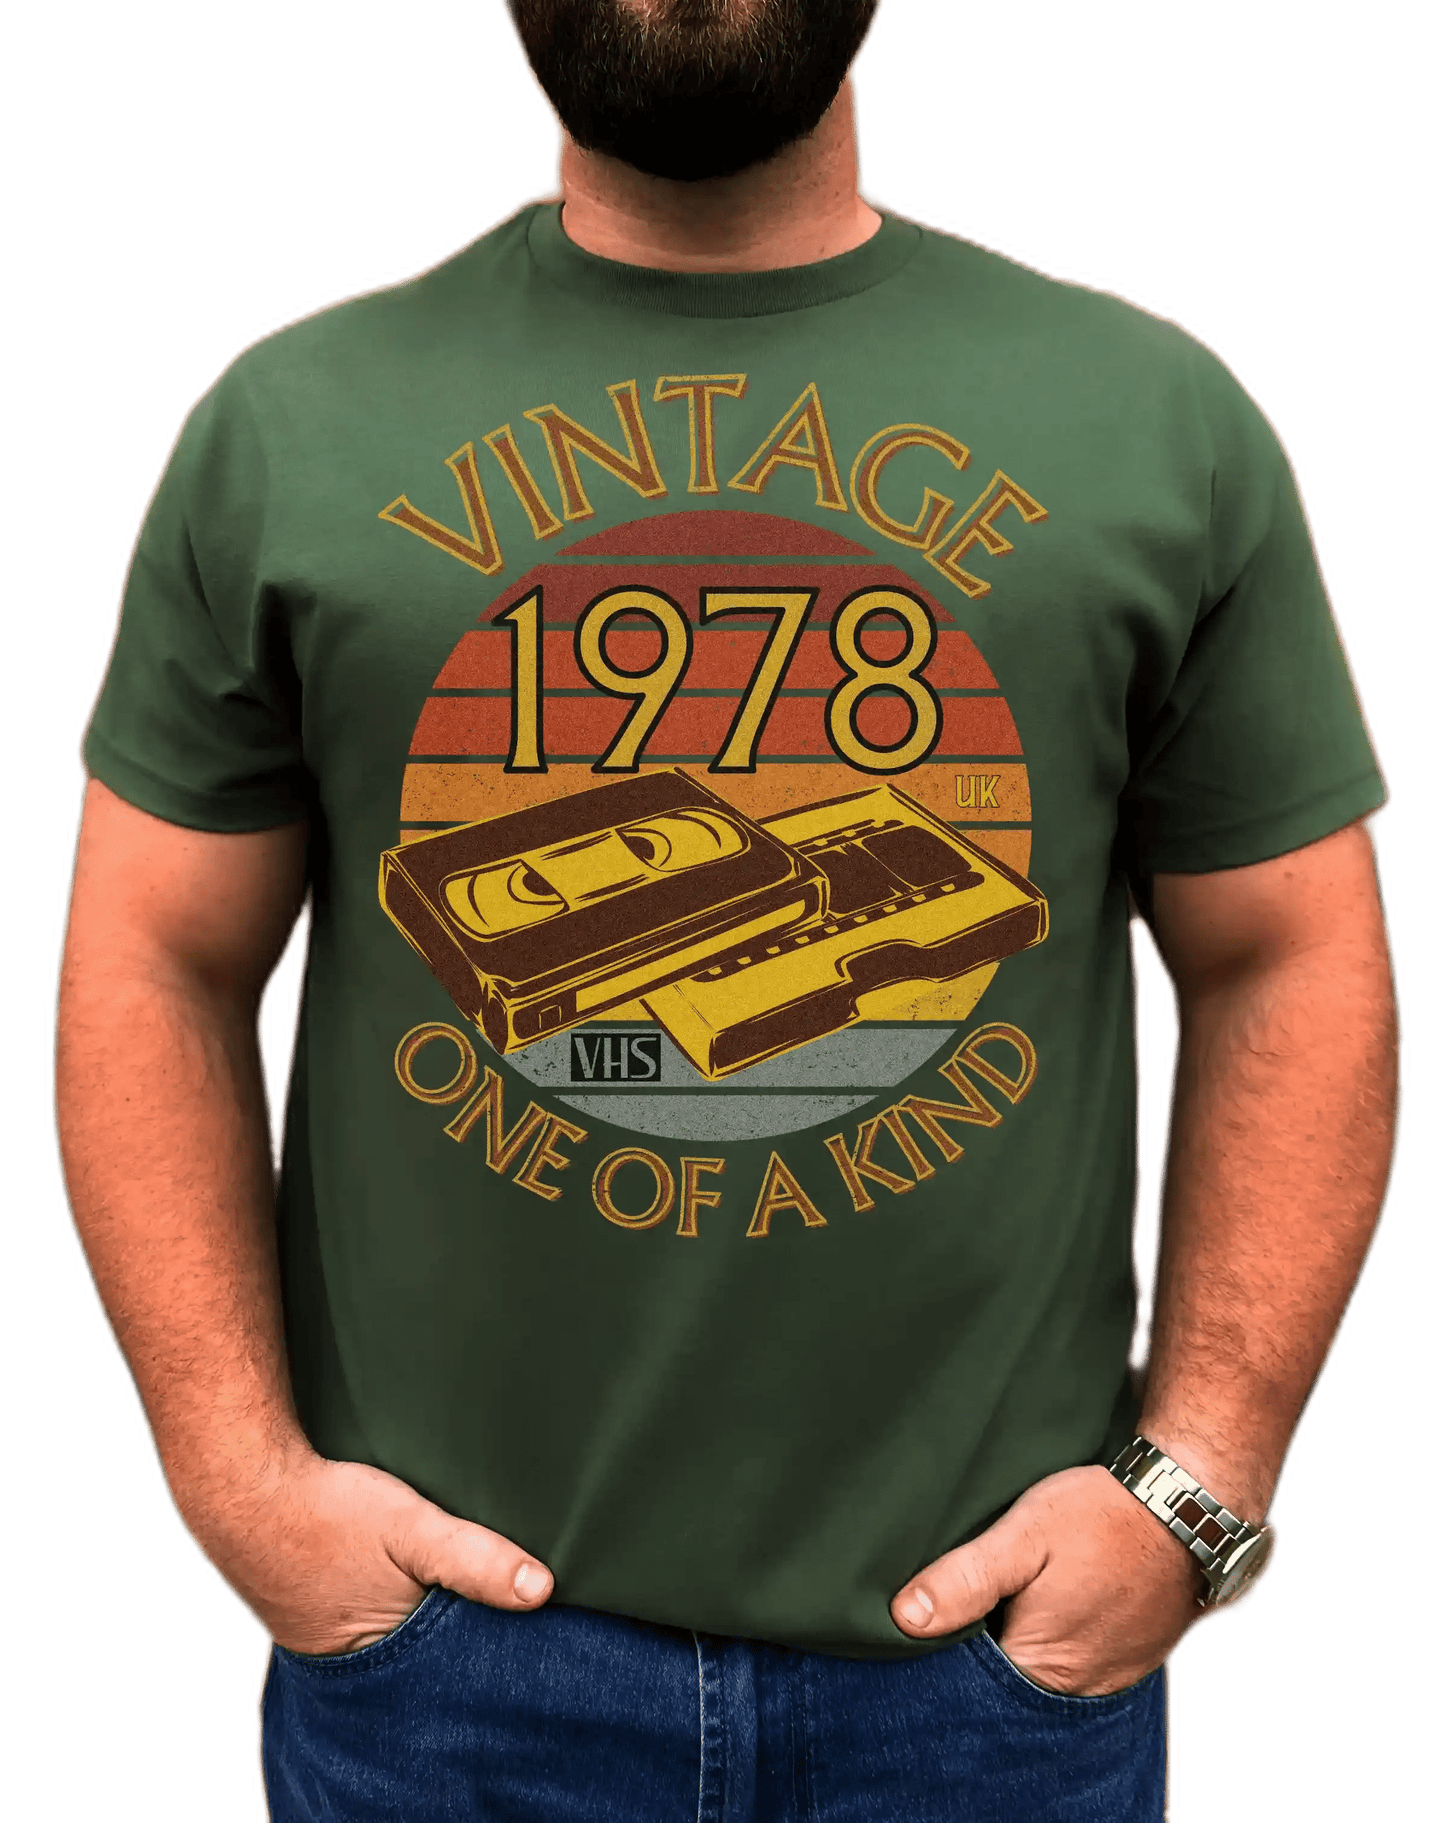 A man wearing green T-shirt browny, sunset circle vintage and one of a kind around it,numbers 1978 UK in  circle & an image of a VHS tape and cover box